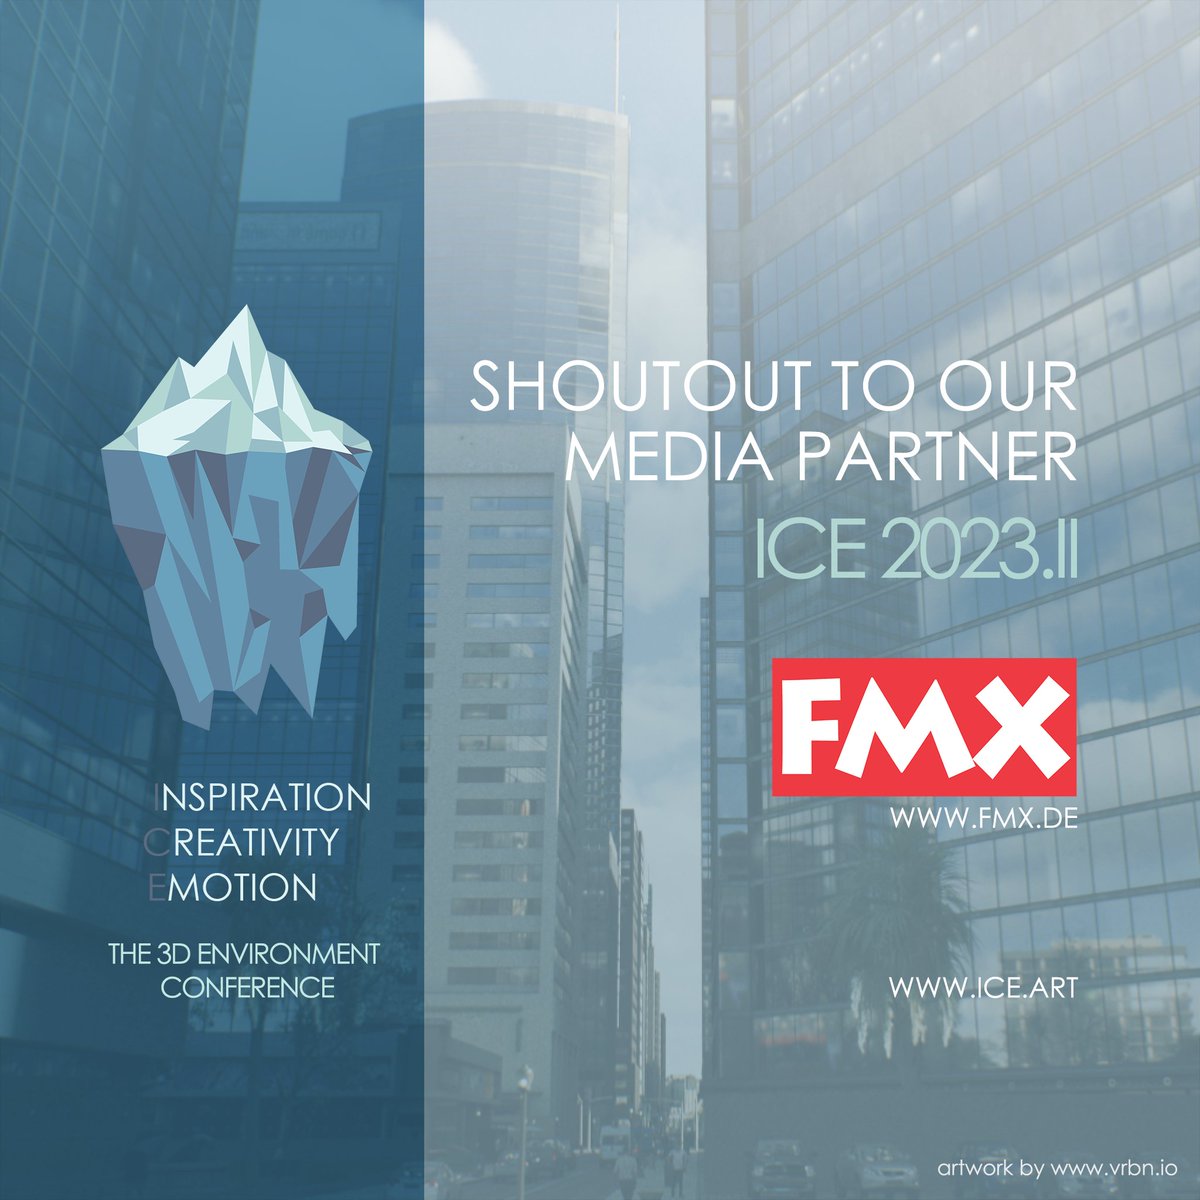 Shout out to @FMX_Conference as a Media Partner! #ice2023 #vrbn #3denvironment #digitalart #architecture #urbanplanning #cg #games #vfx #geodesign #inspiration #creativity #emotion